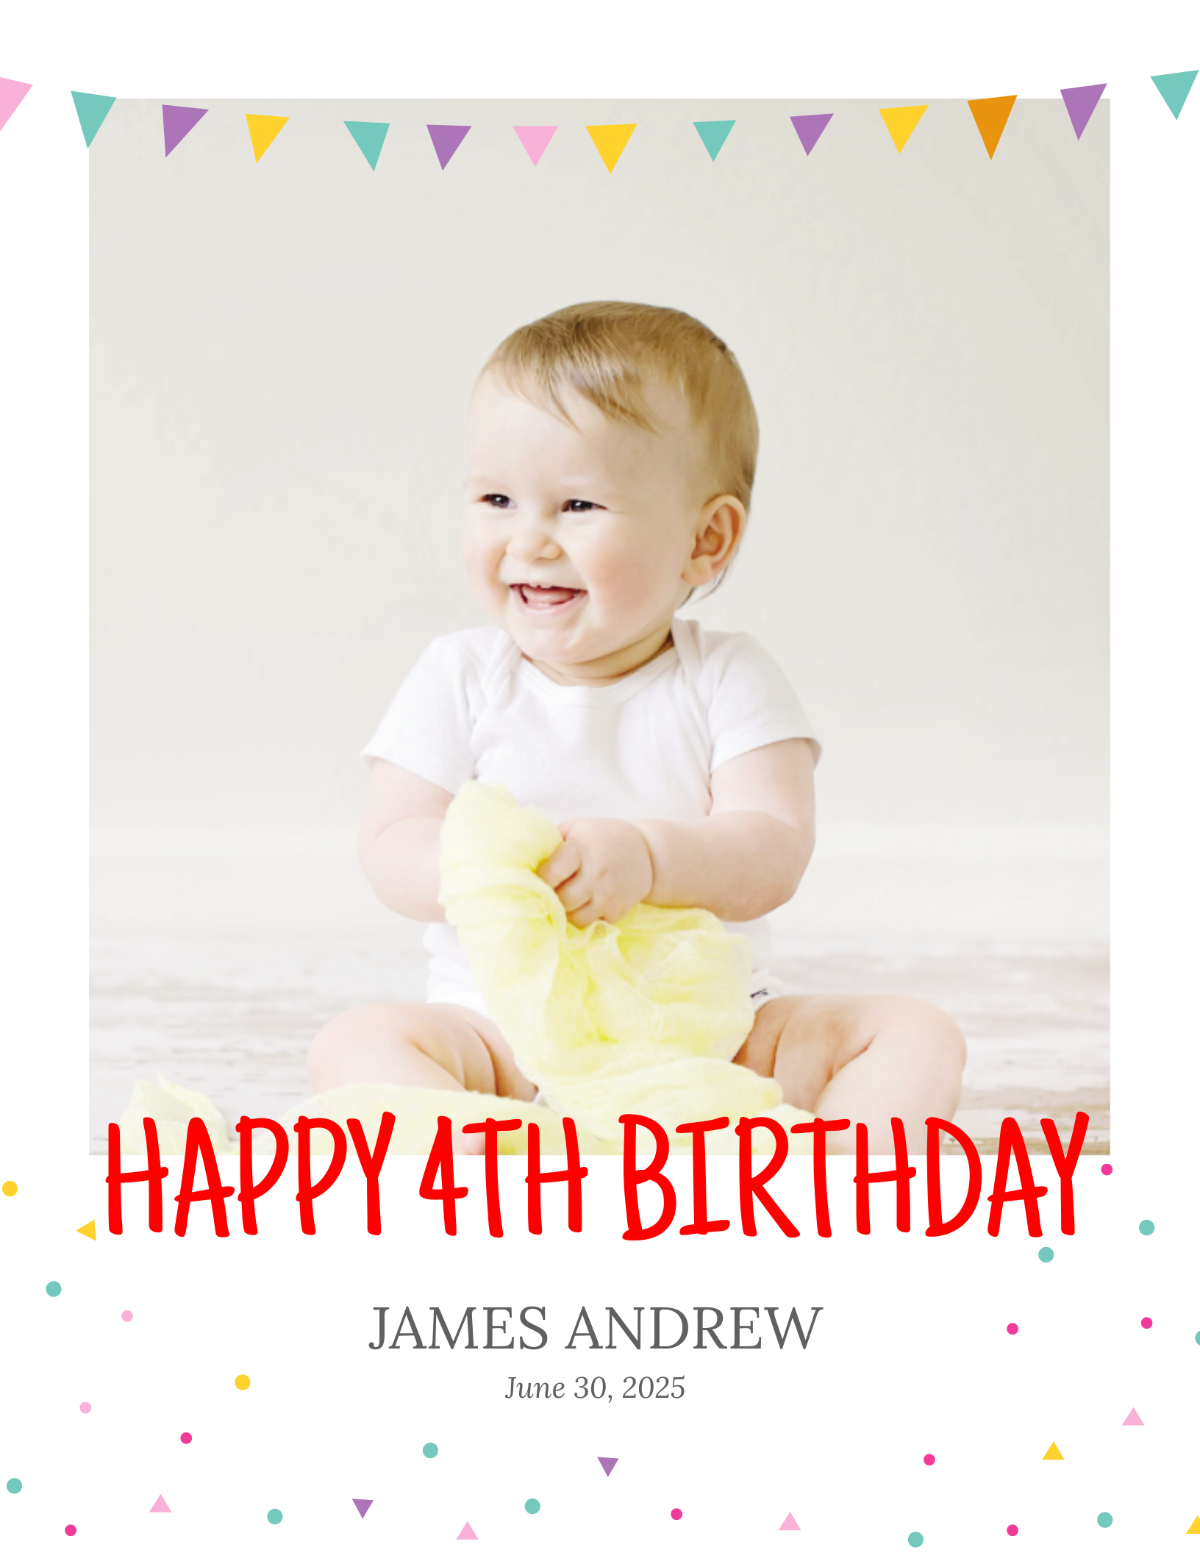 Free Birthday Photo Book Cover Template